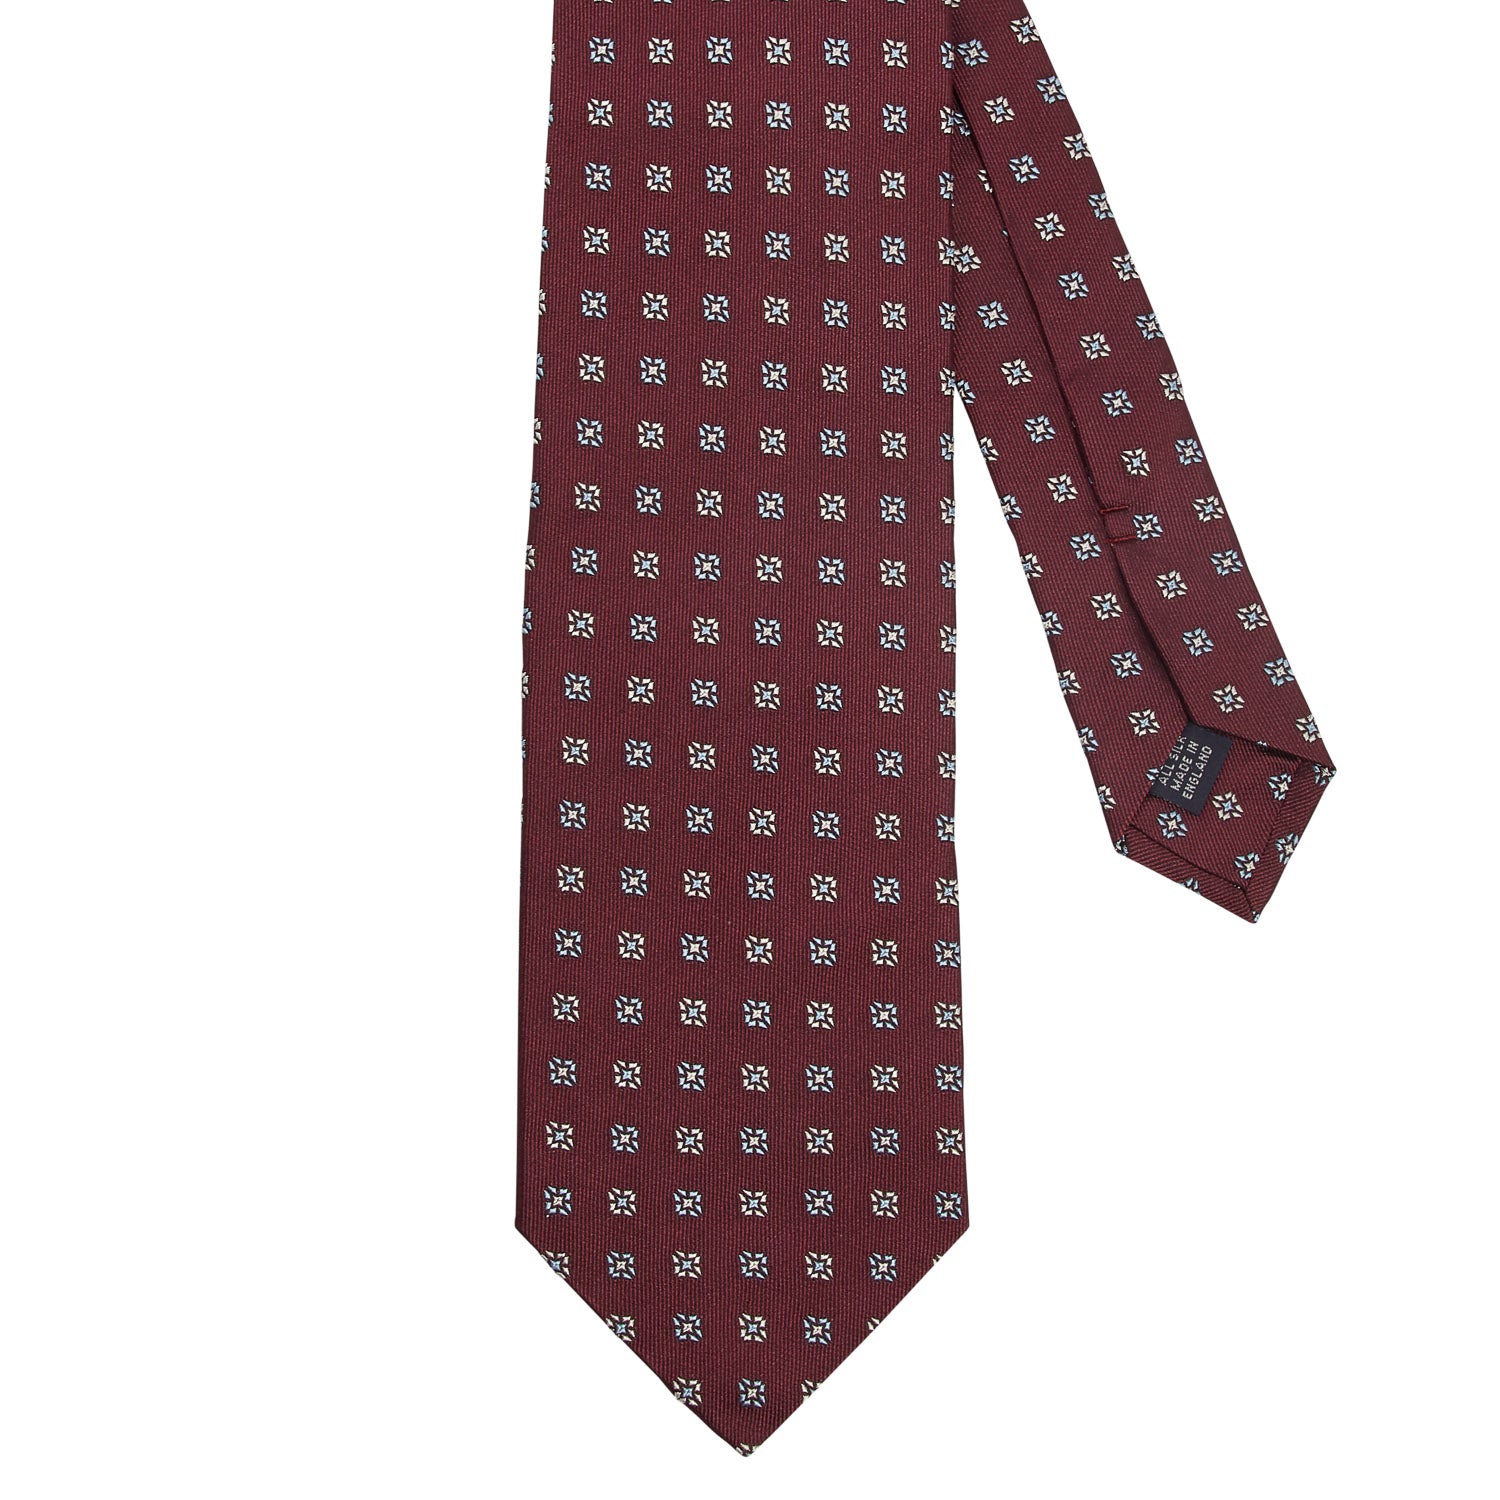 A Sovereign Grade Oxblood Square Floral Jacquard Tie from KirbyAllison.com, showcasing quality craftsmanship.